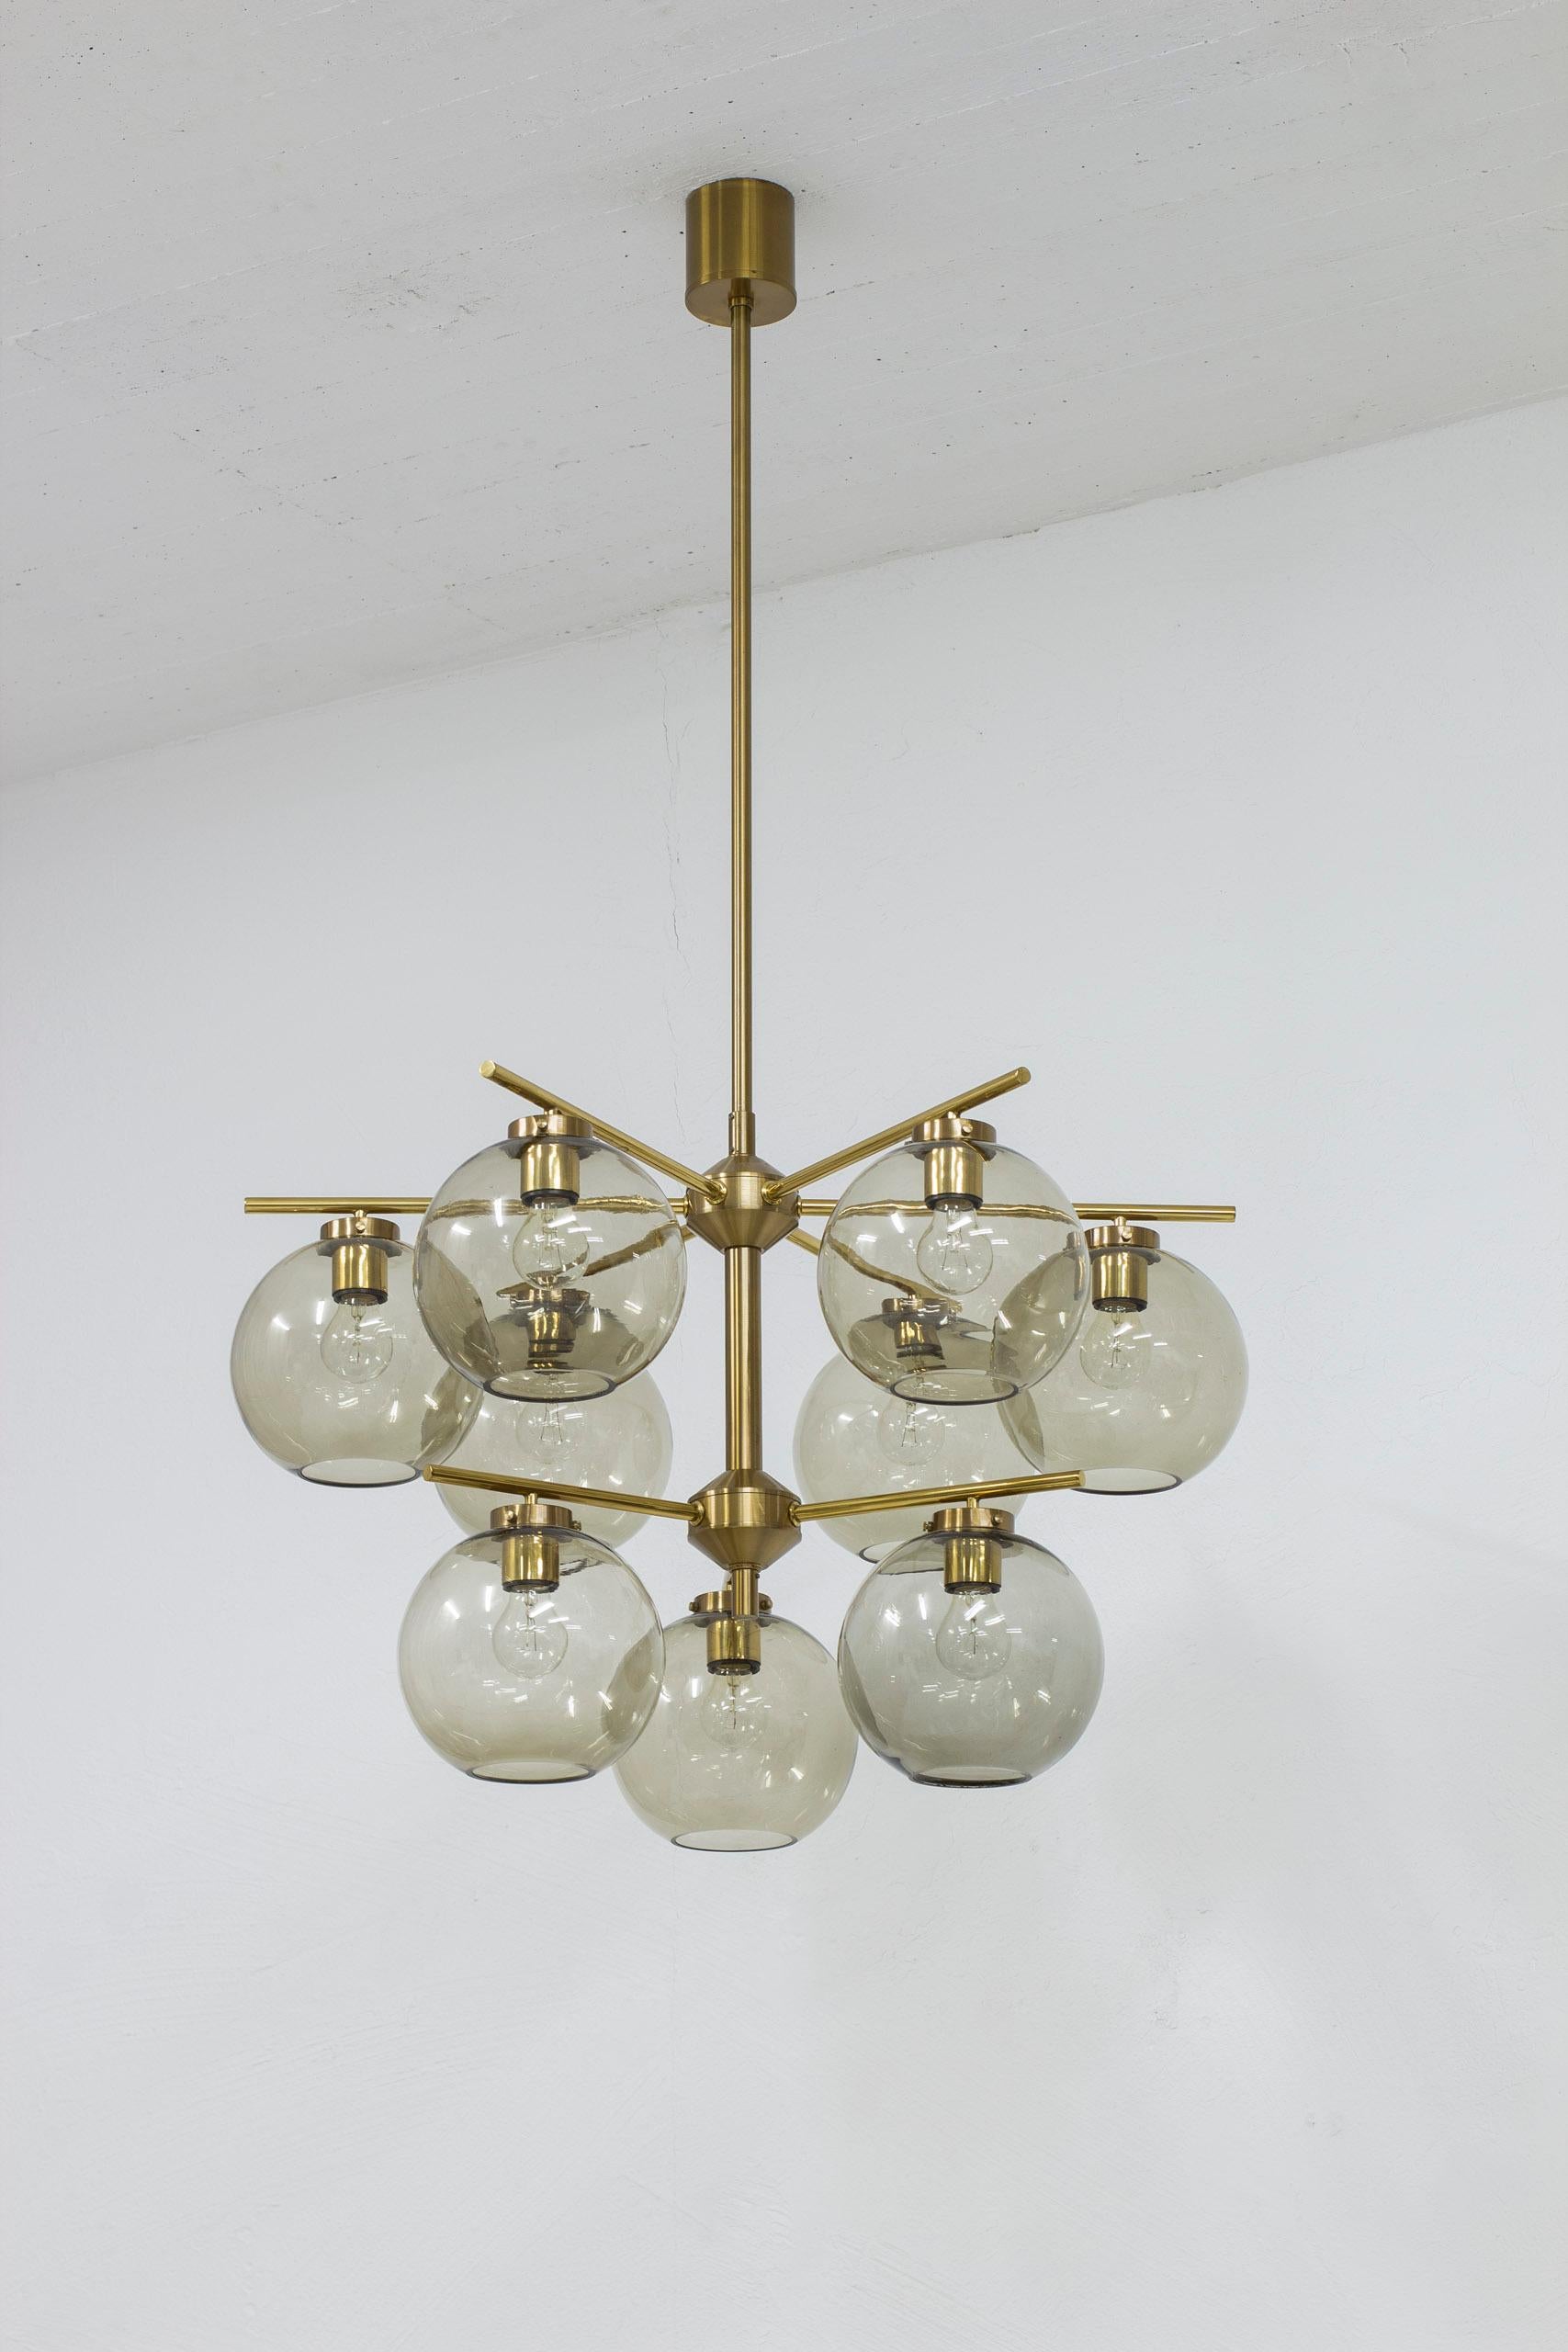 Pair of chandeliers by Holger Johansson. produced in Sweden by Westal during the 1960s. Made from brass with nine smoke glass spheres. Very good vintage condition with light age related wear. Note that there are very minor chips on the glass where